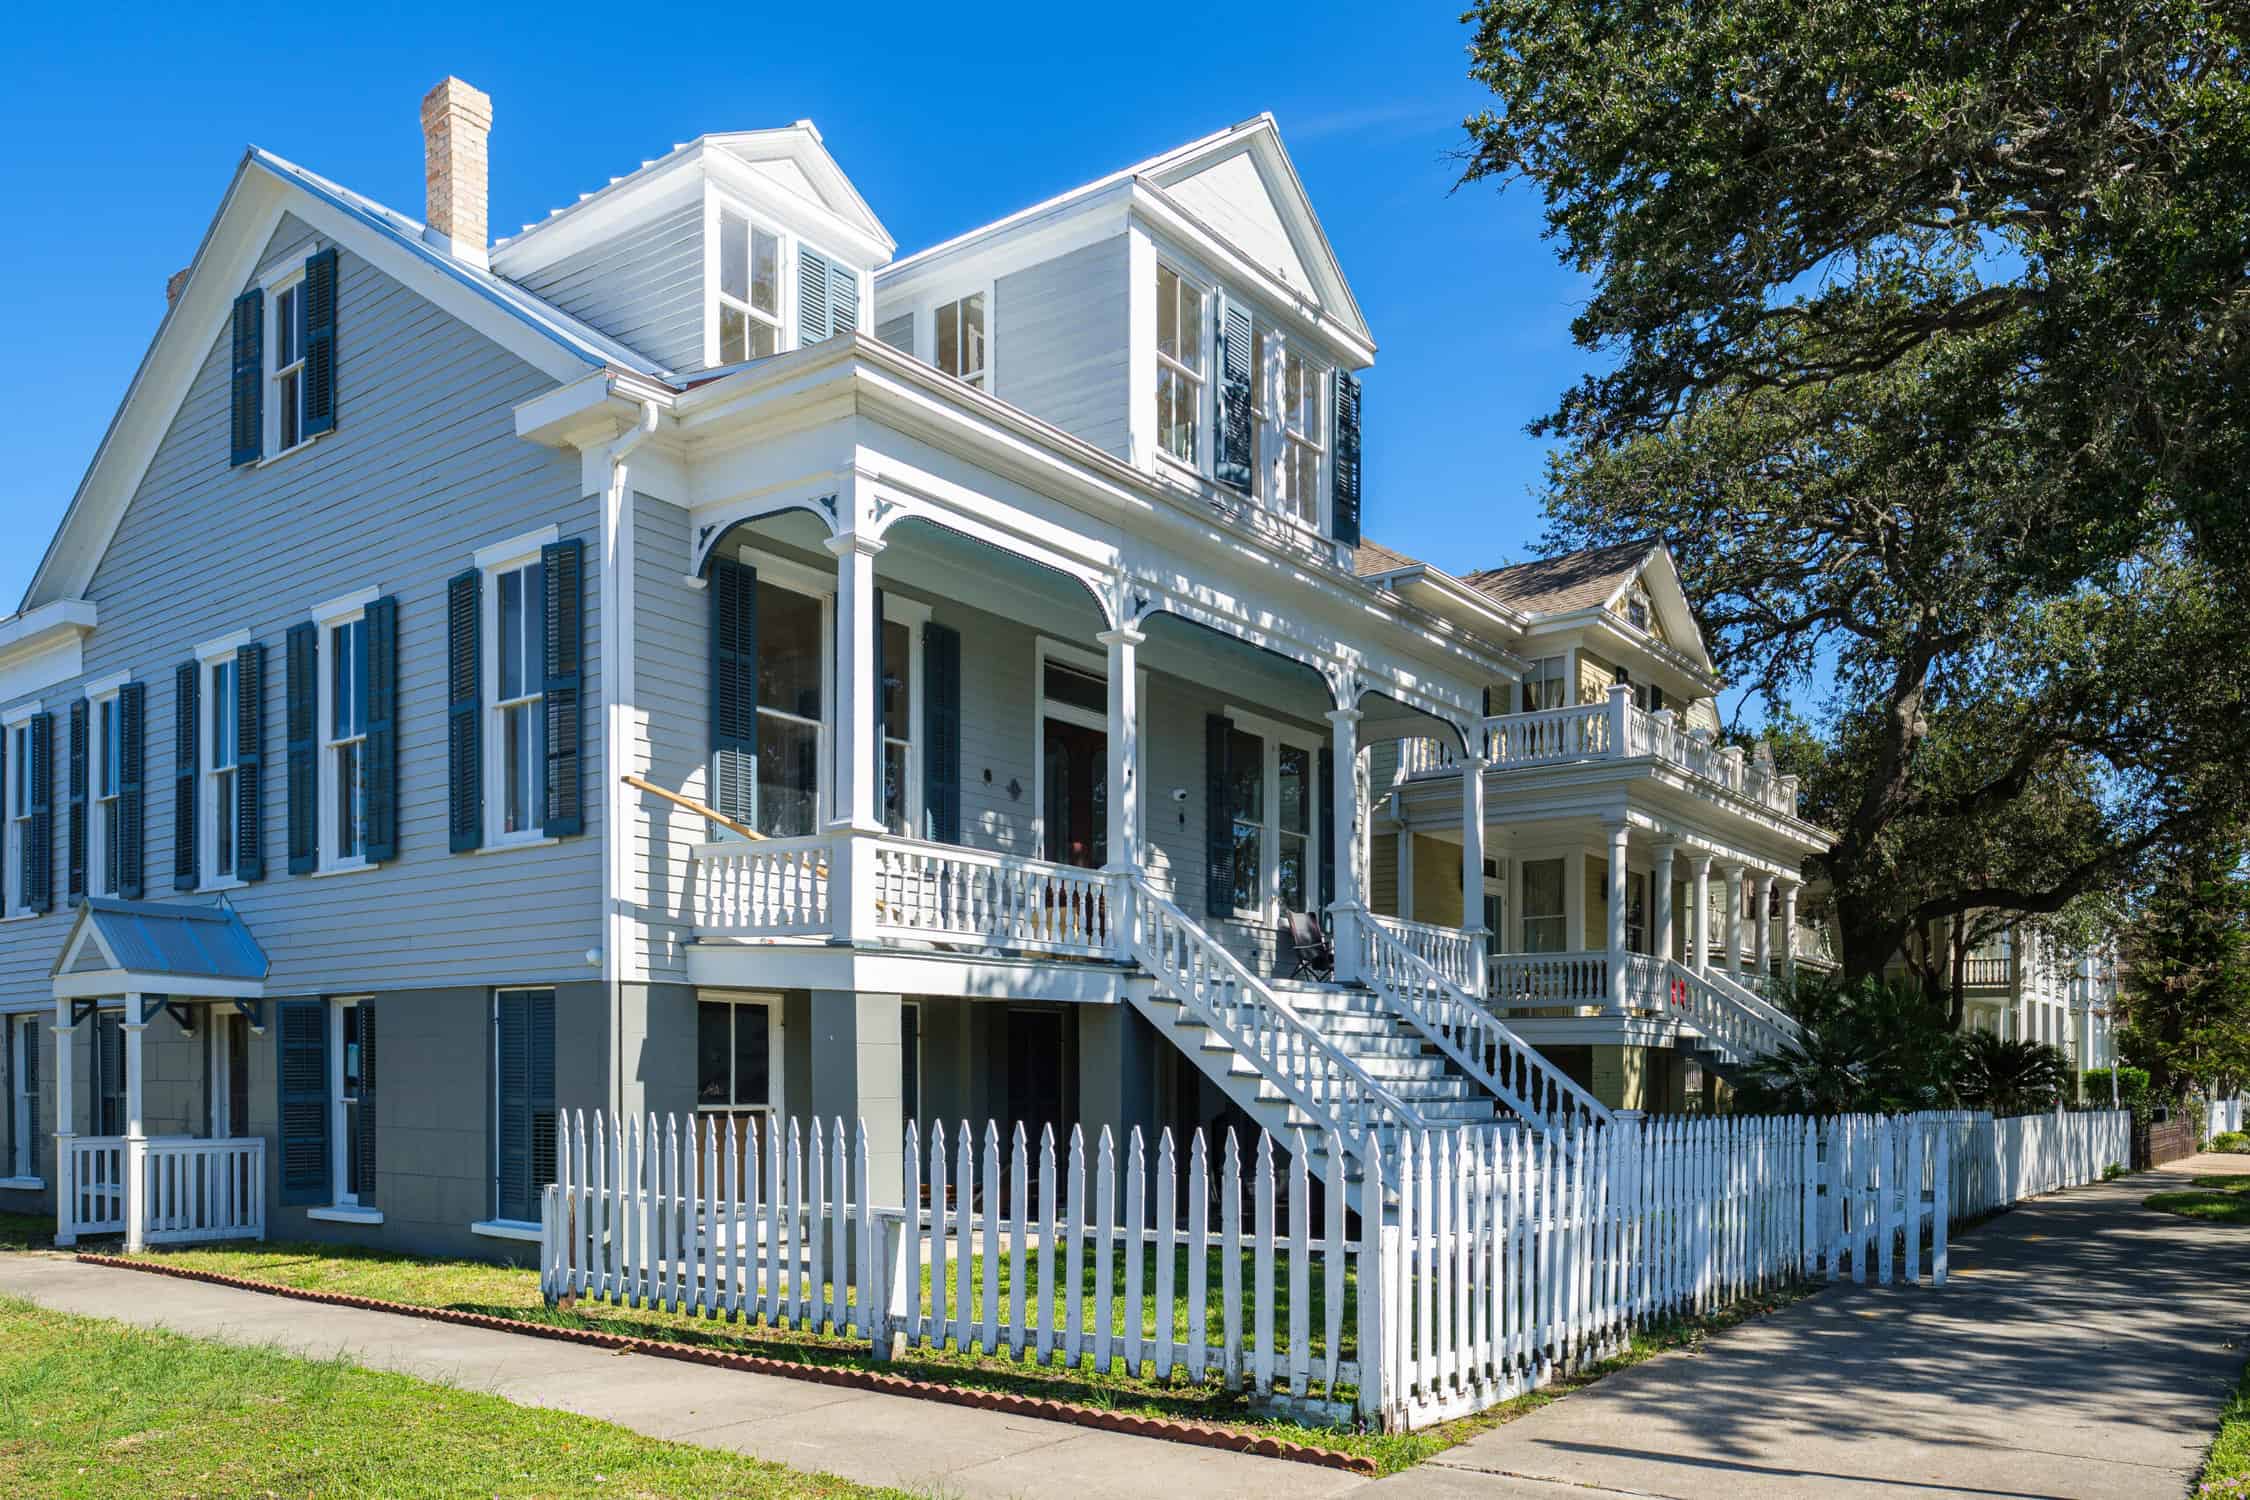 Residential Historic District contains beautifully restored vintage homes of the Queen Anne architecture style.